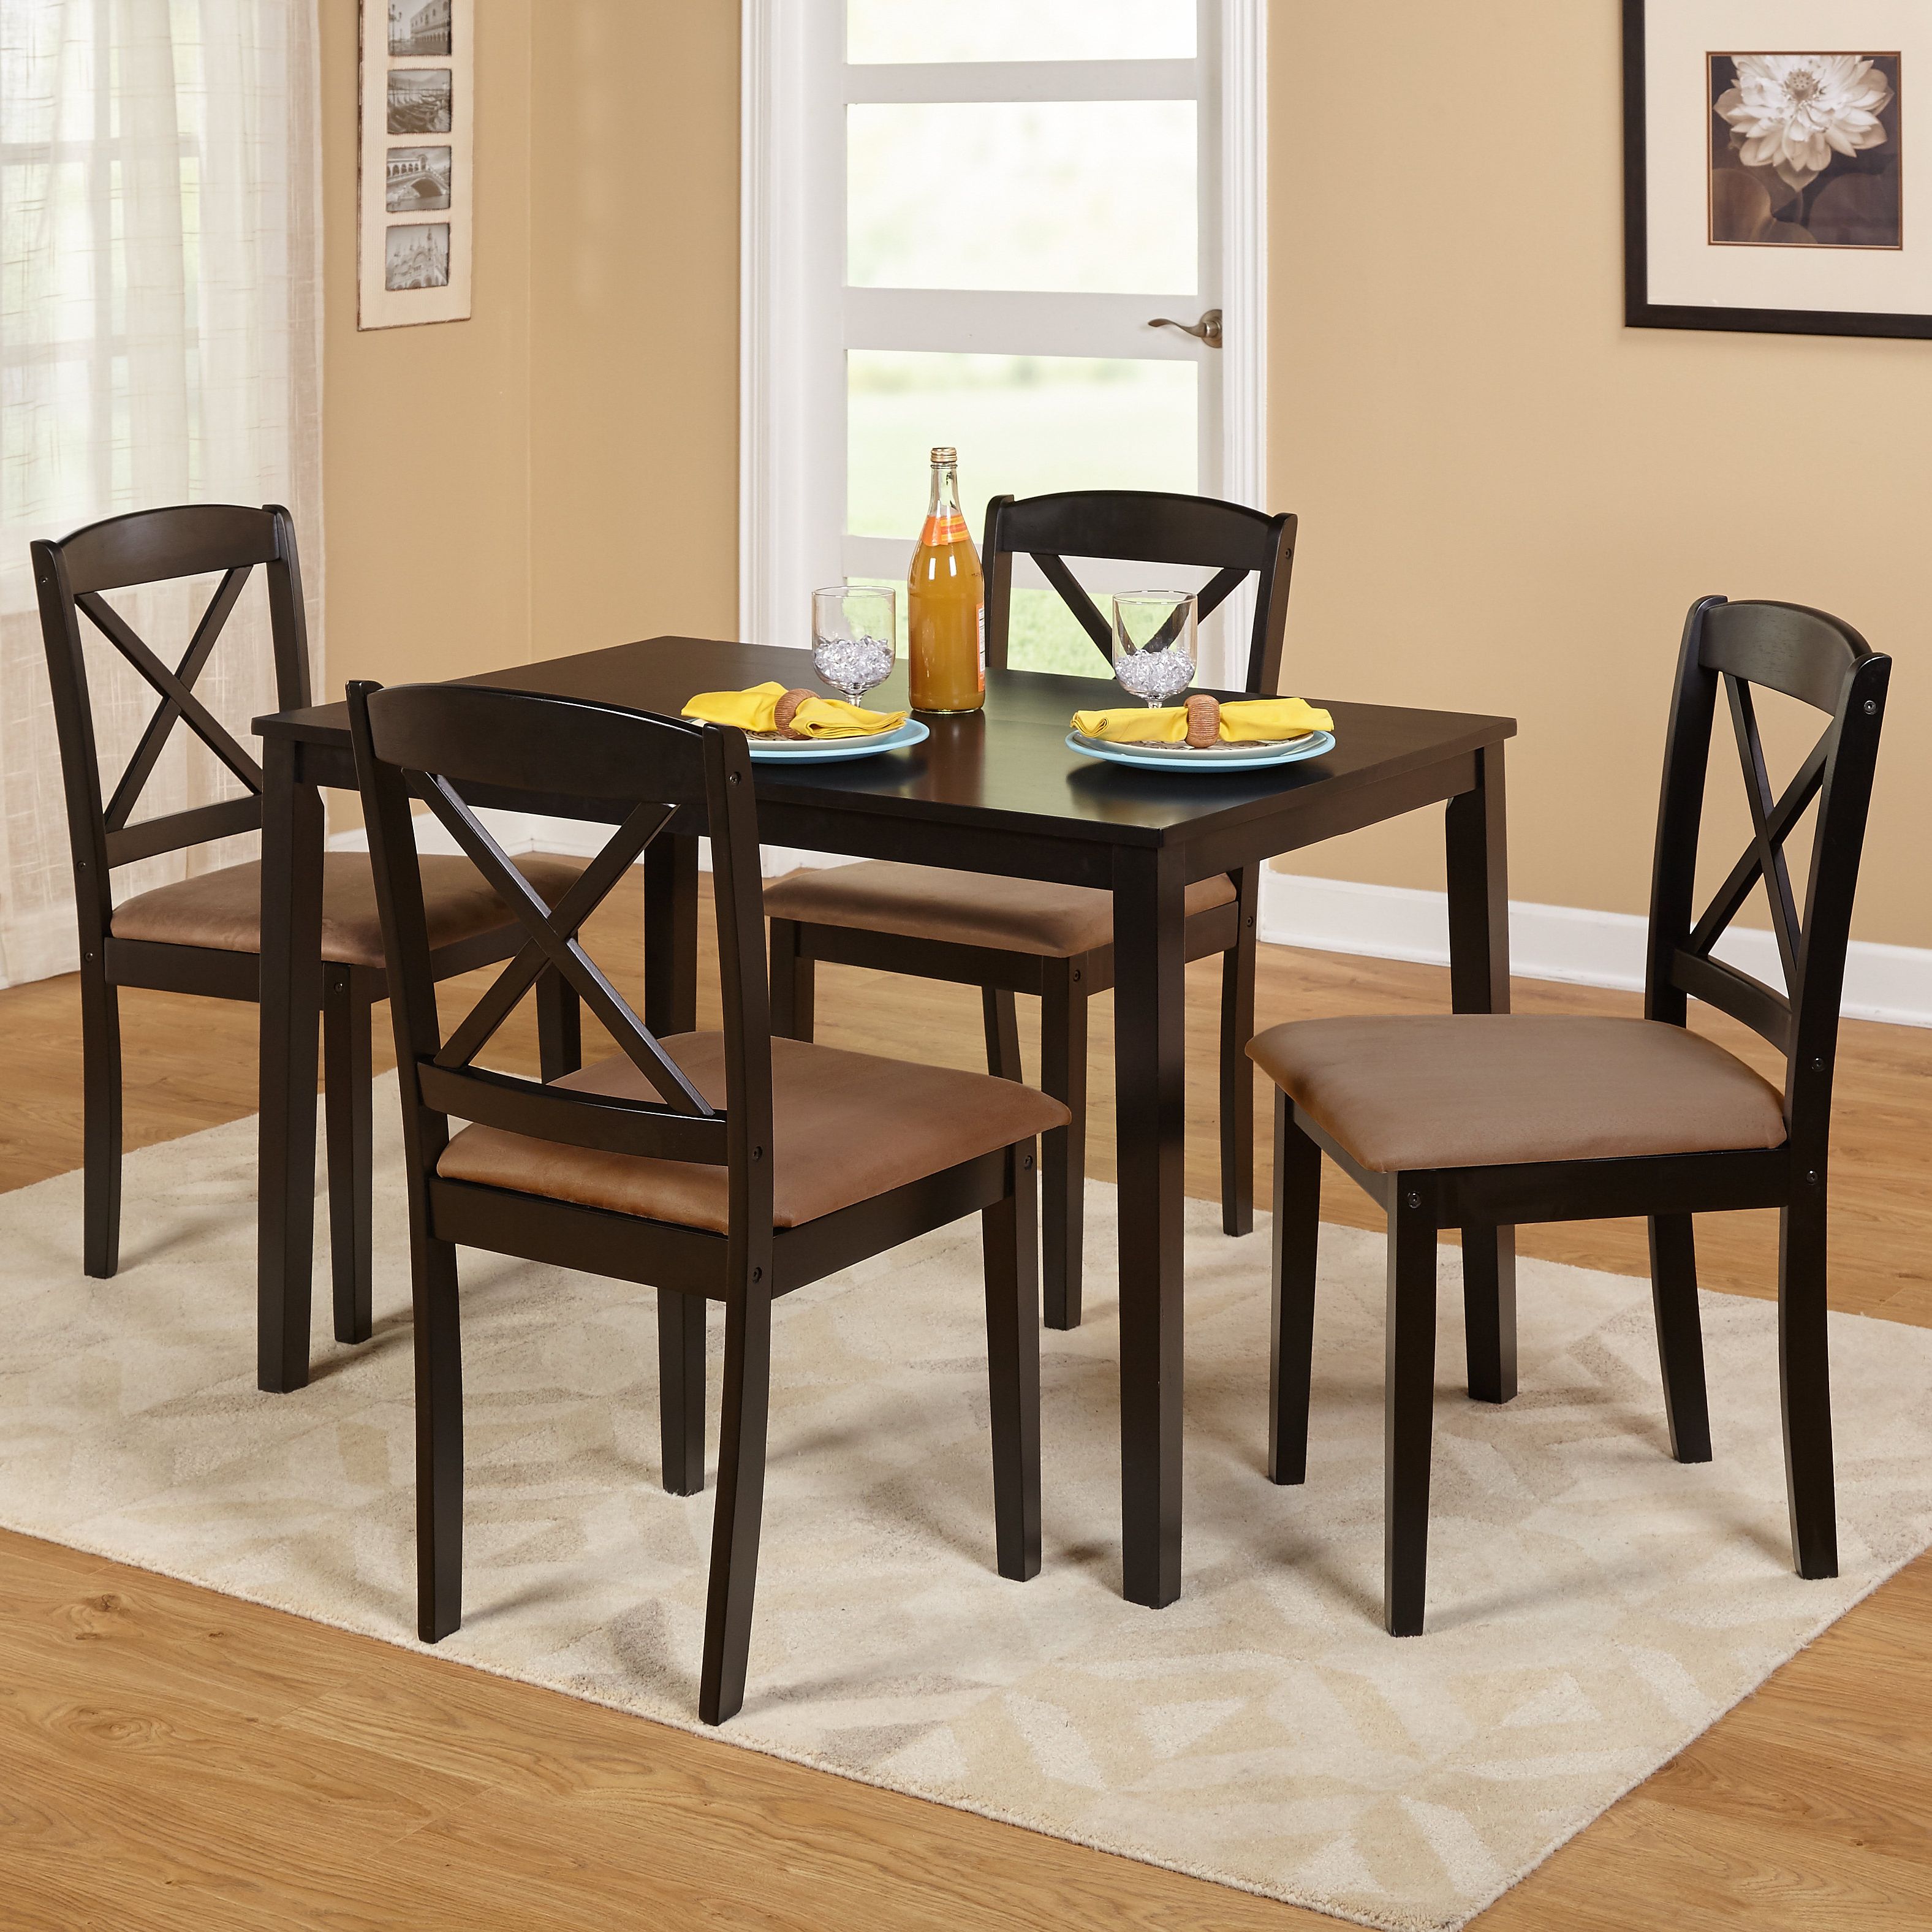 Tenney 3 Piece Counter Height Dining Sets In Favorite Scarlett 5 Piece Dining Set & Reviews (View 20 of 25)